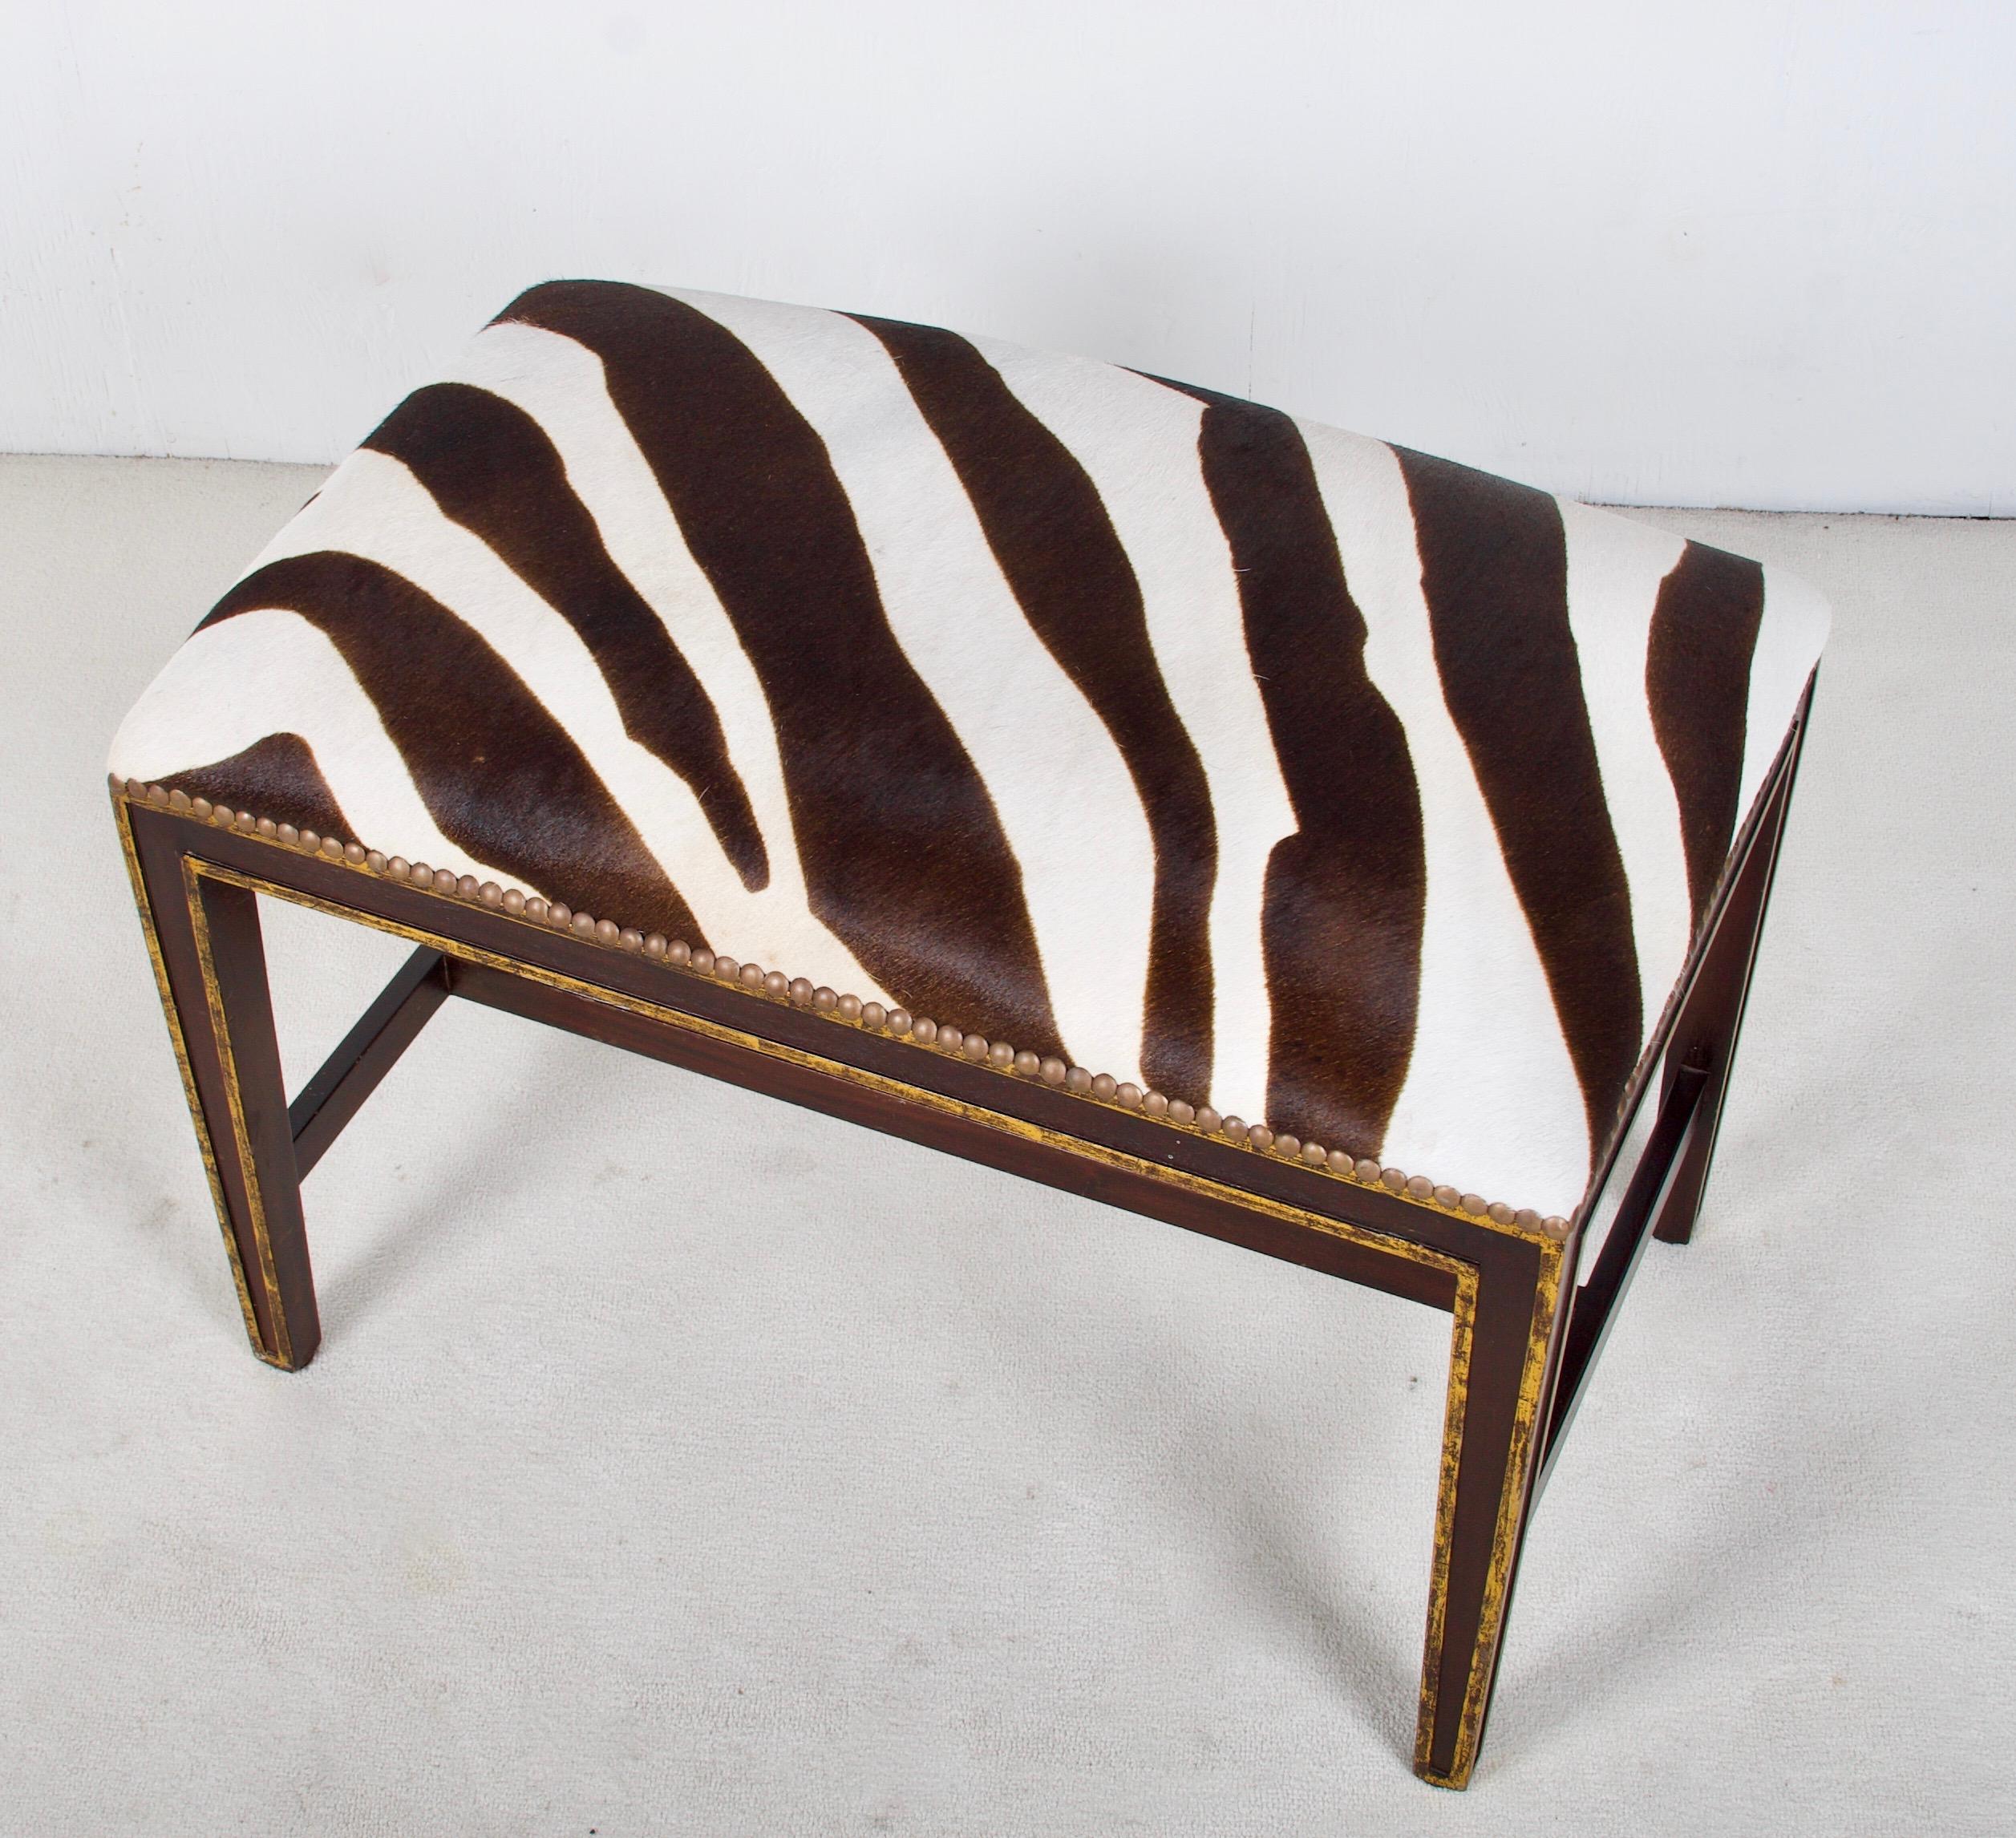 Hand-Crafted Classic Style Gilded and Ebonized Bench, Upholstered in Faux Zebra Cowhide